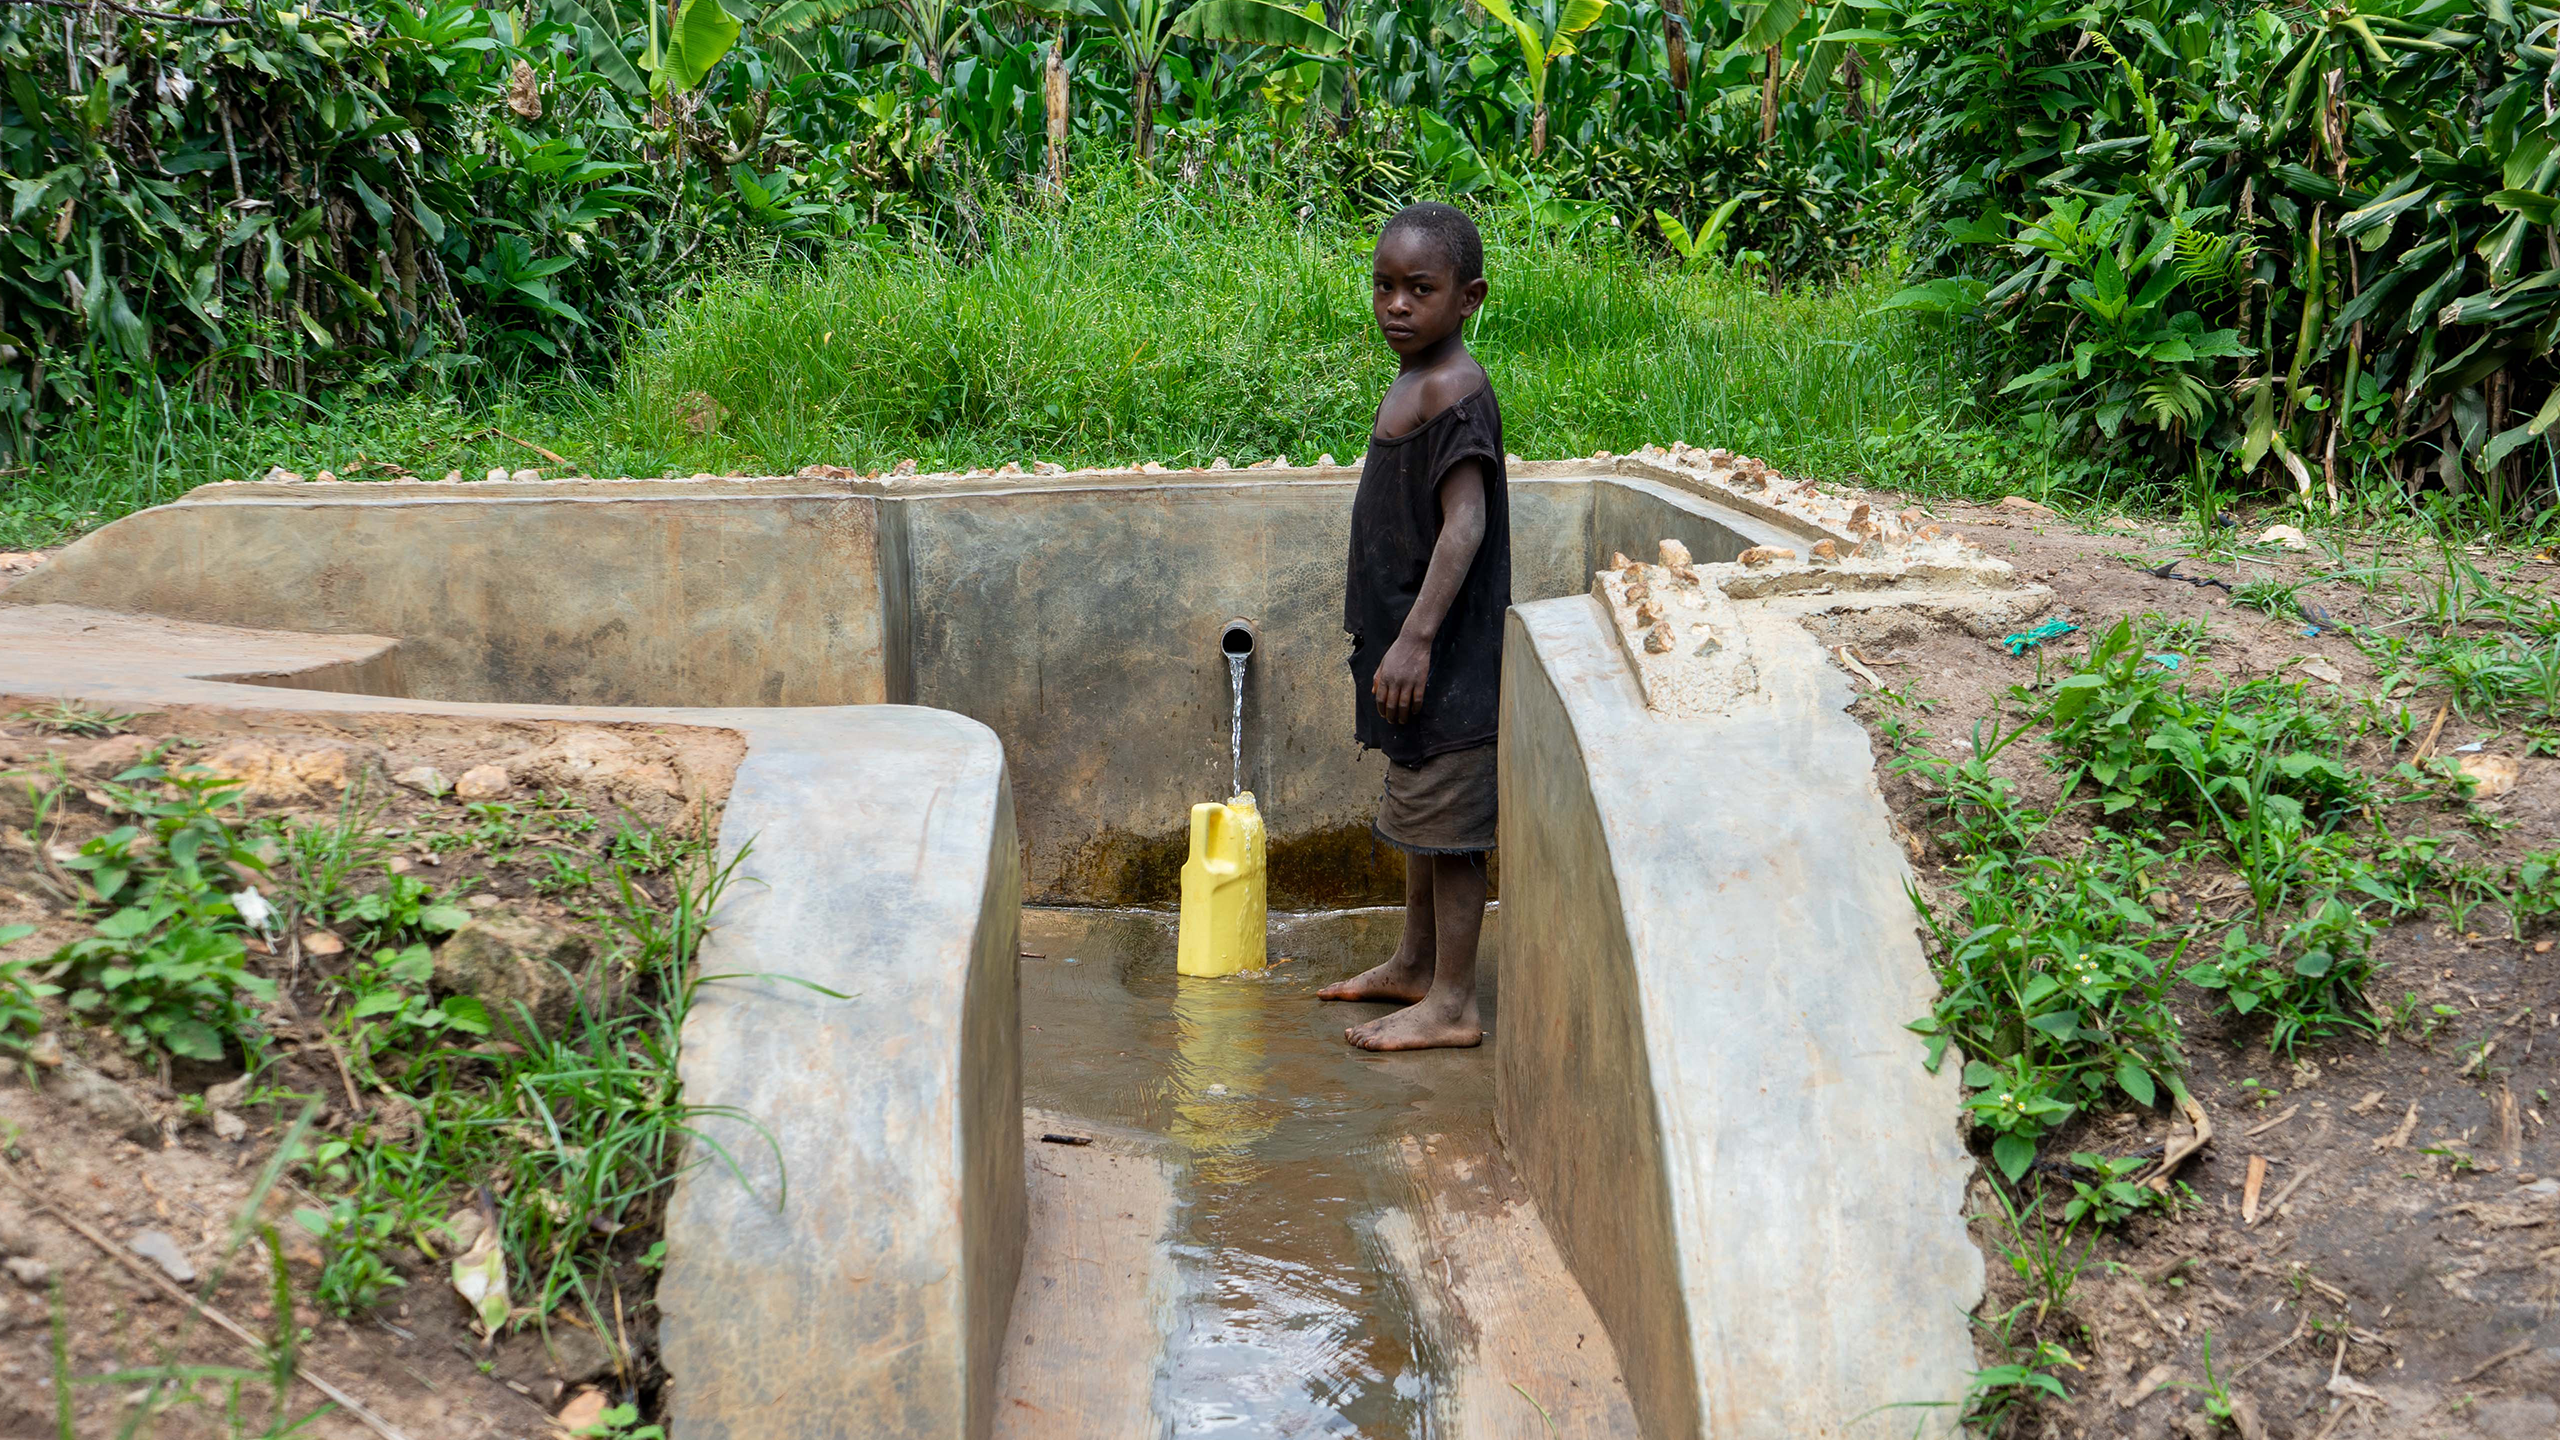 Young community members in Kahoko Cluster safely use water without worrying about health challenges.